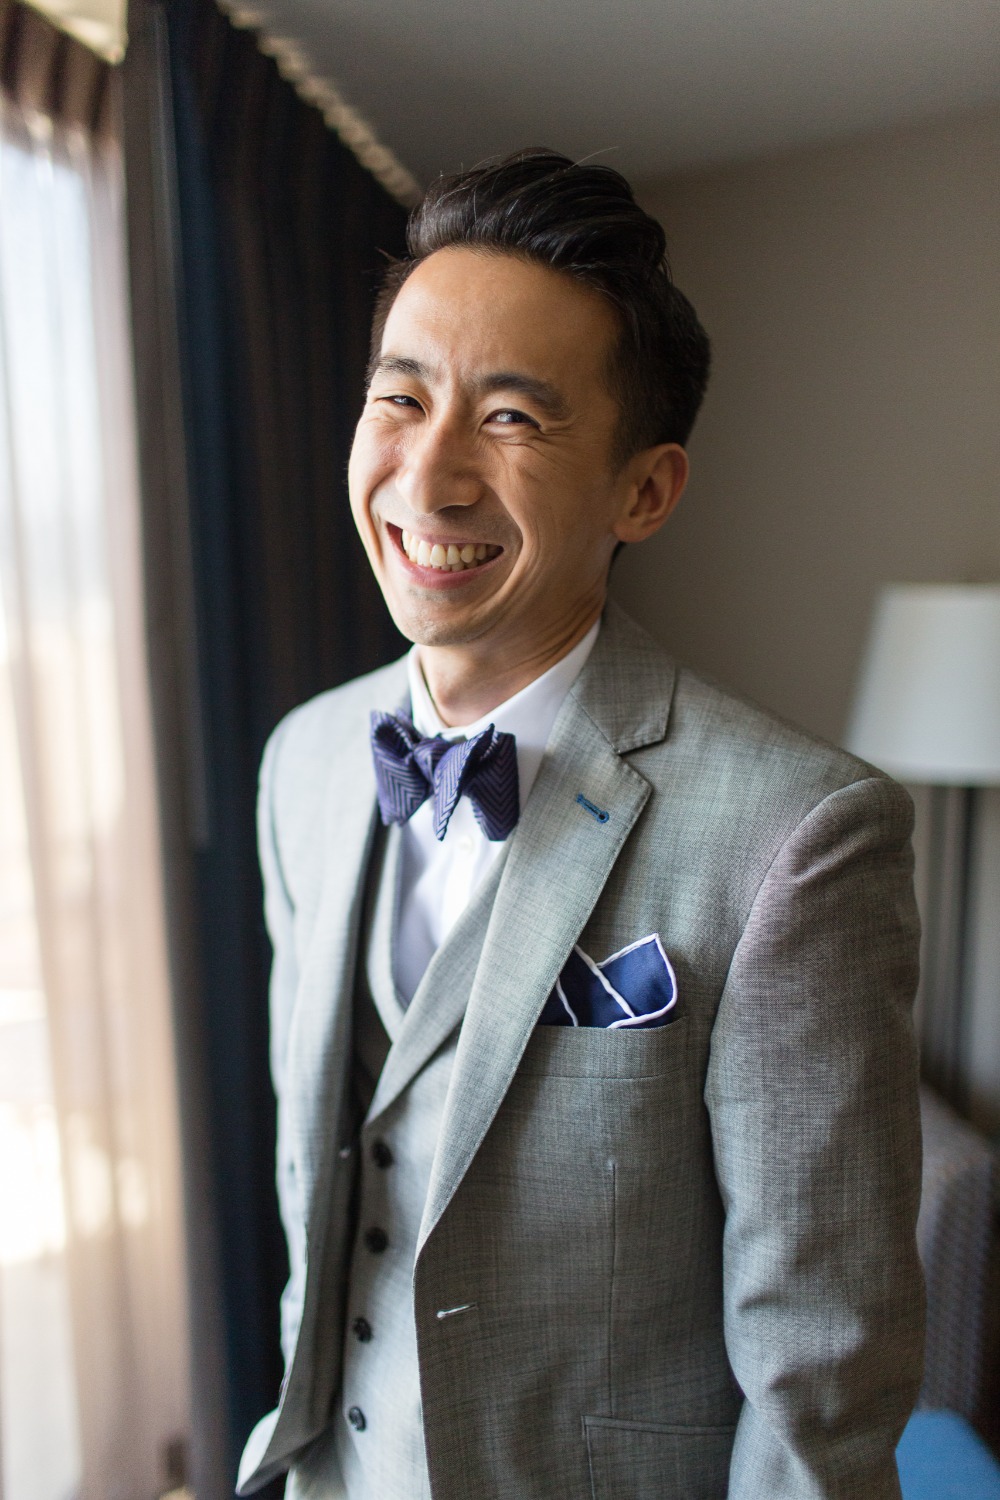 Groom in gray suit with bowtie